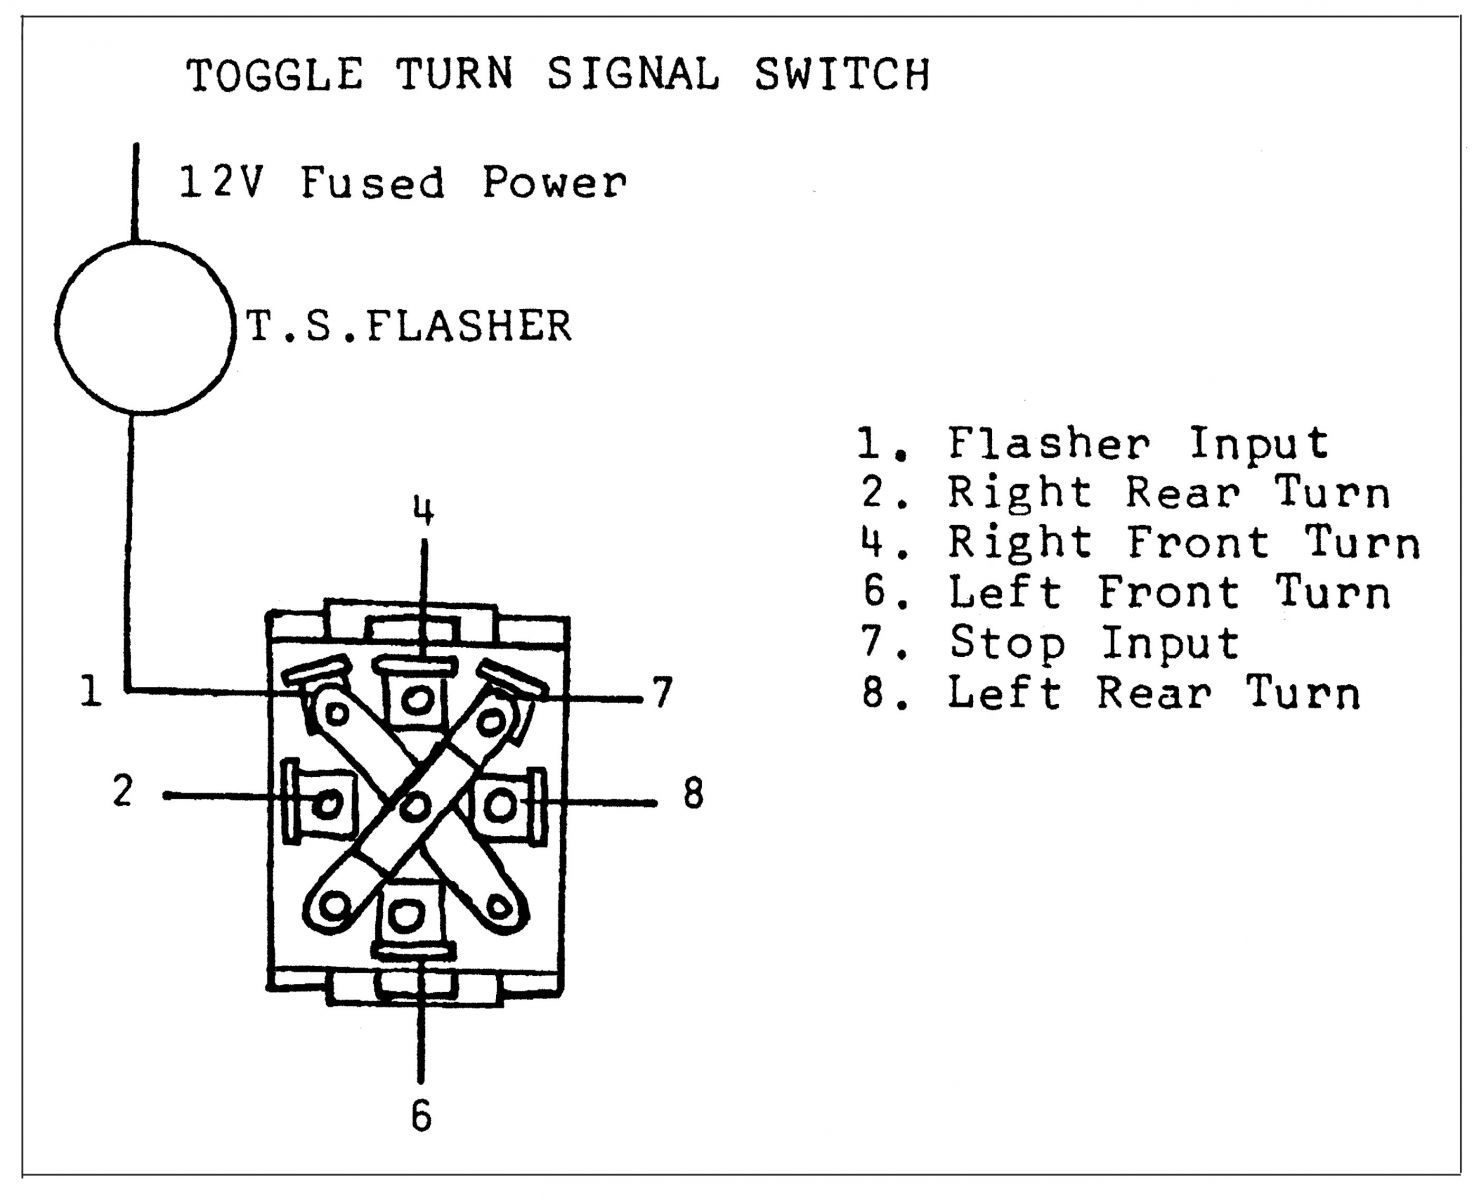 Turn Signals For Early Hot Rods | Hotrod Hotline - On Off On Toggle Switch Wiring Diagram